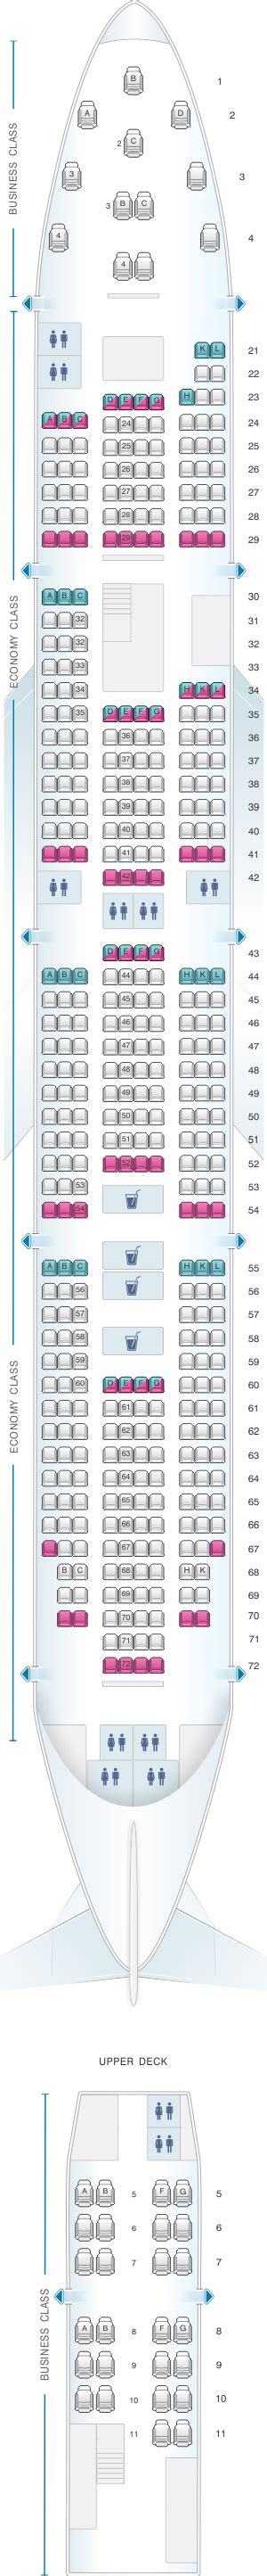 Seat Map Rossiya Airlines Boeing B777 300er Seatmaestro Porn Sex Picture